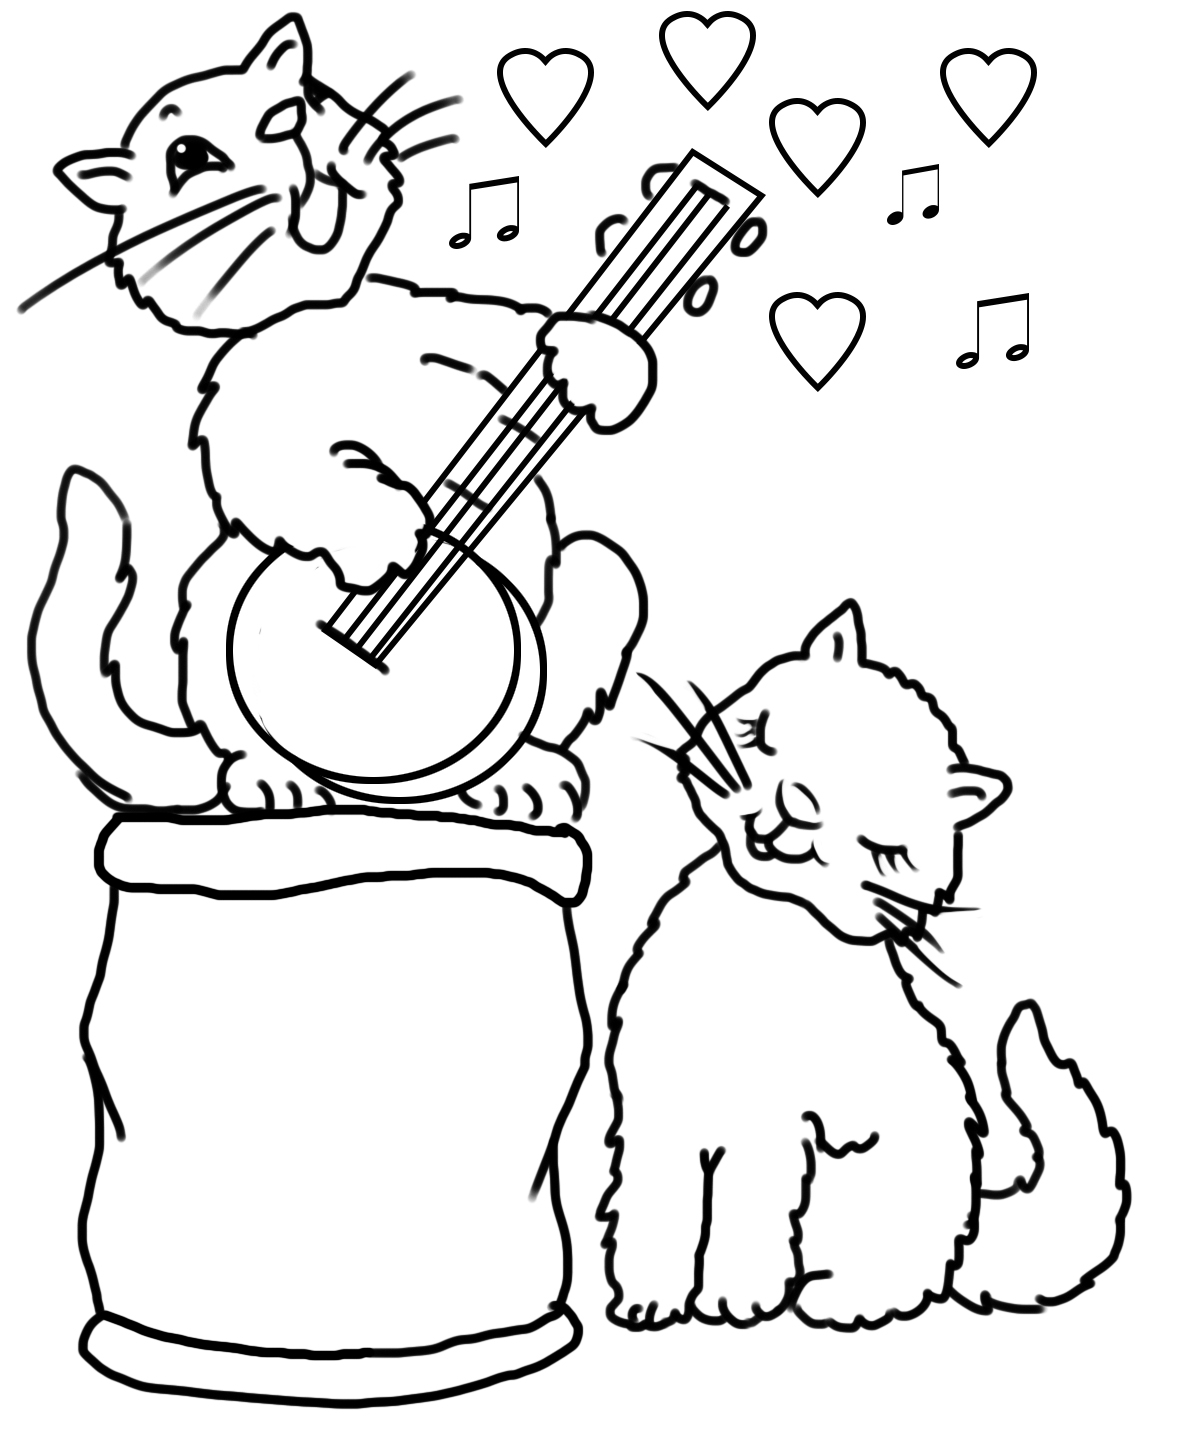 two cats in love and a love song on banjo